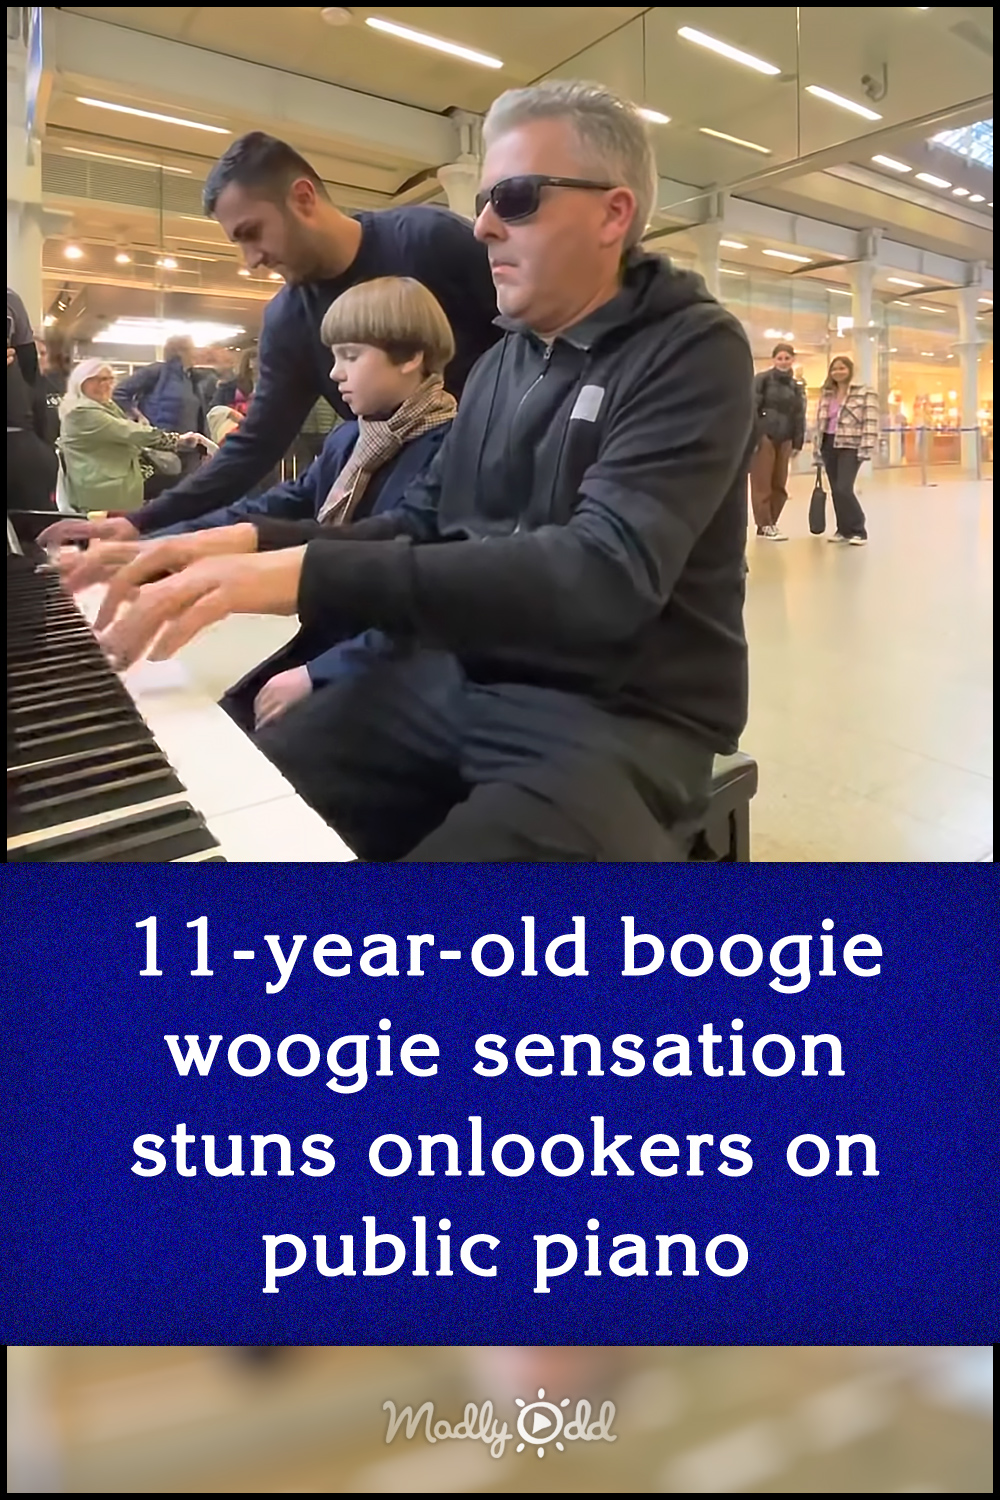 11-year-old boogie woogie sensation stuns onlookers on public piano